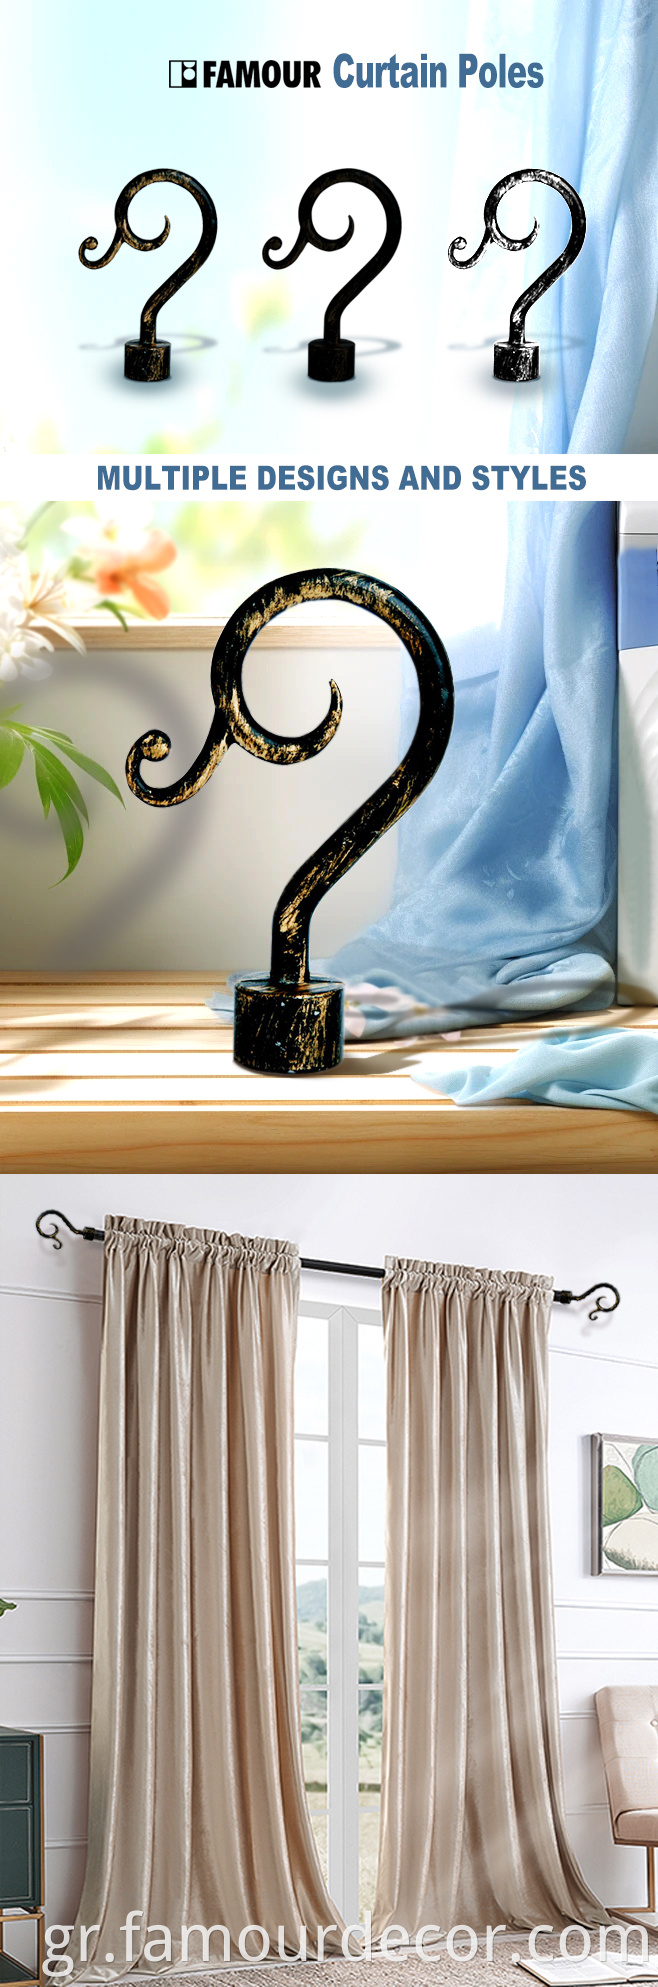 Curtain rods exported to Europe and America